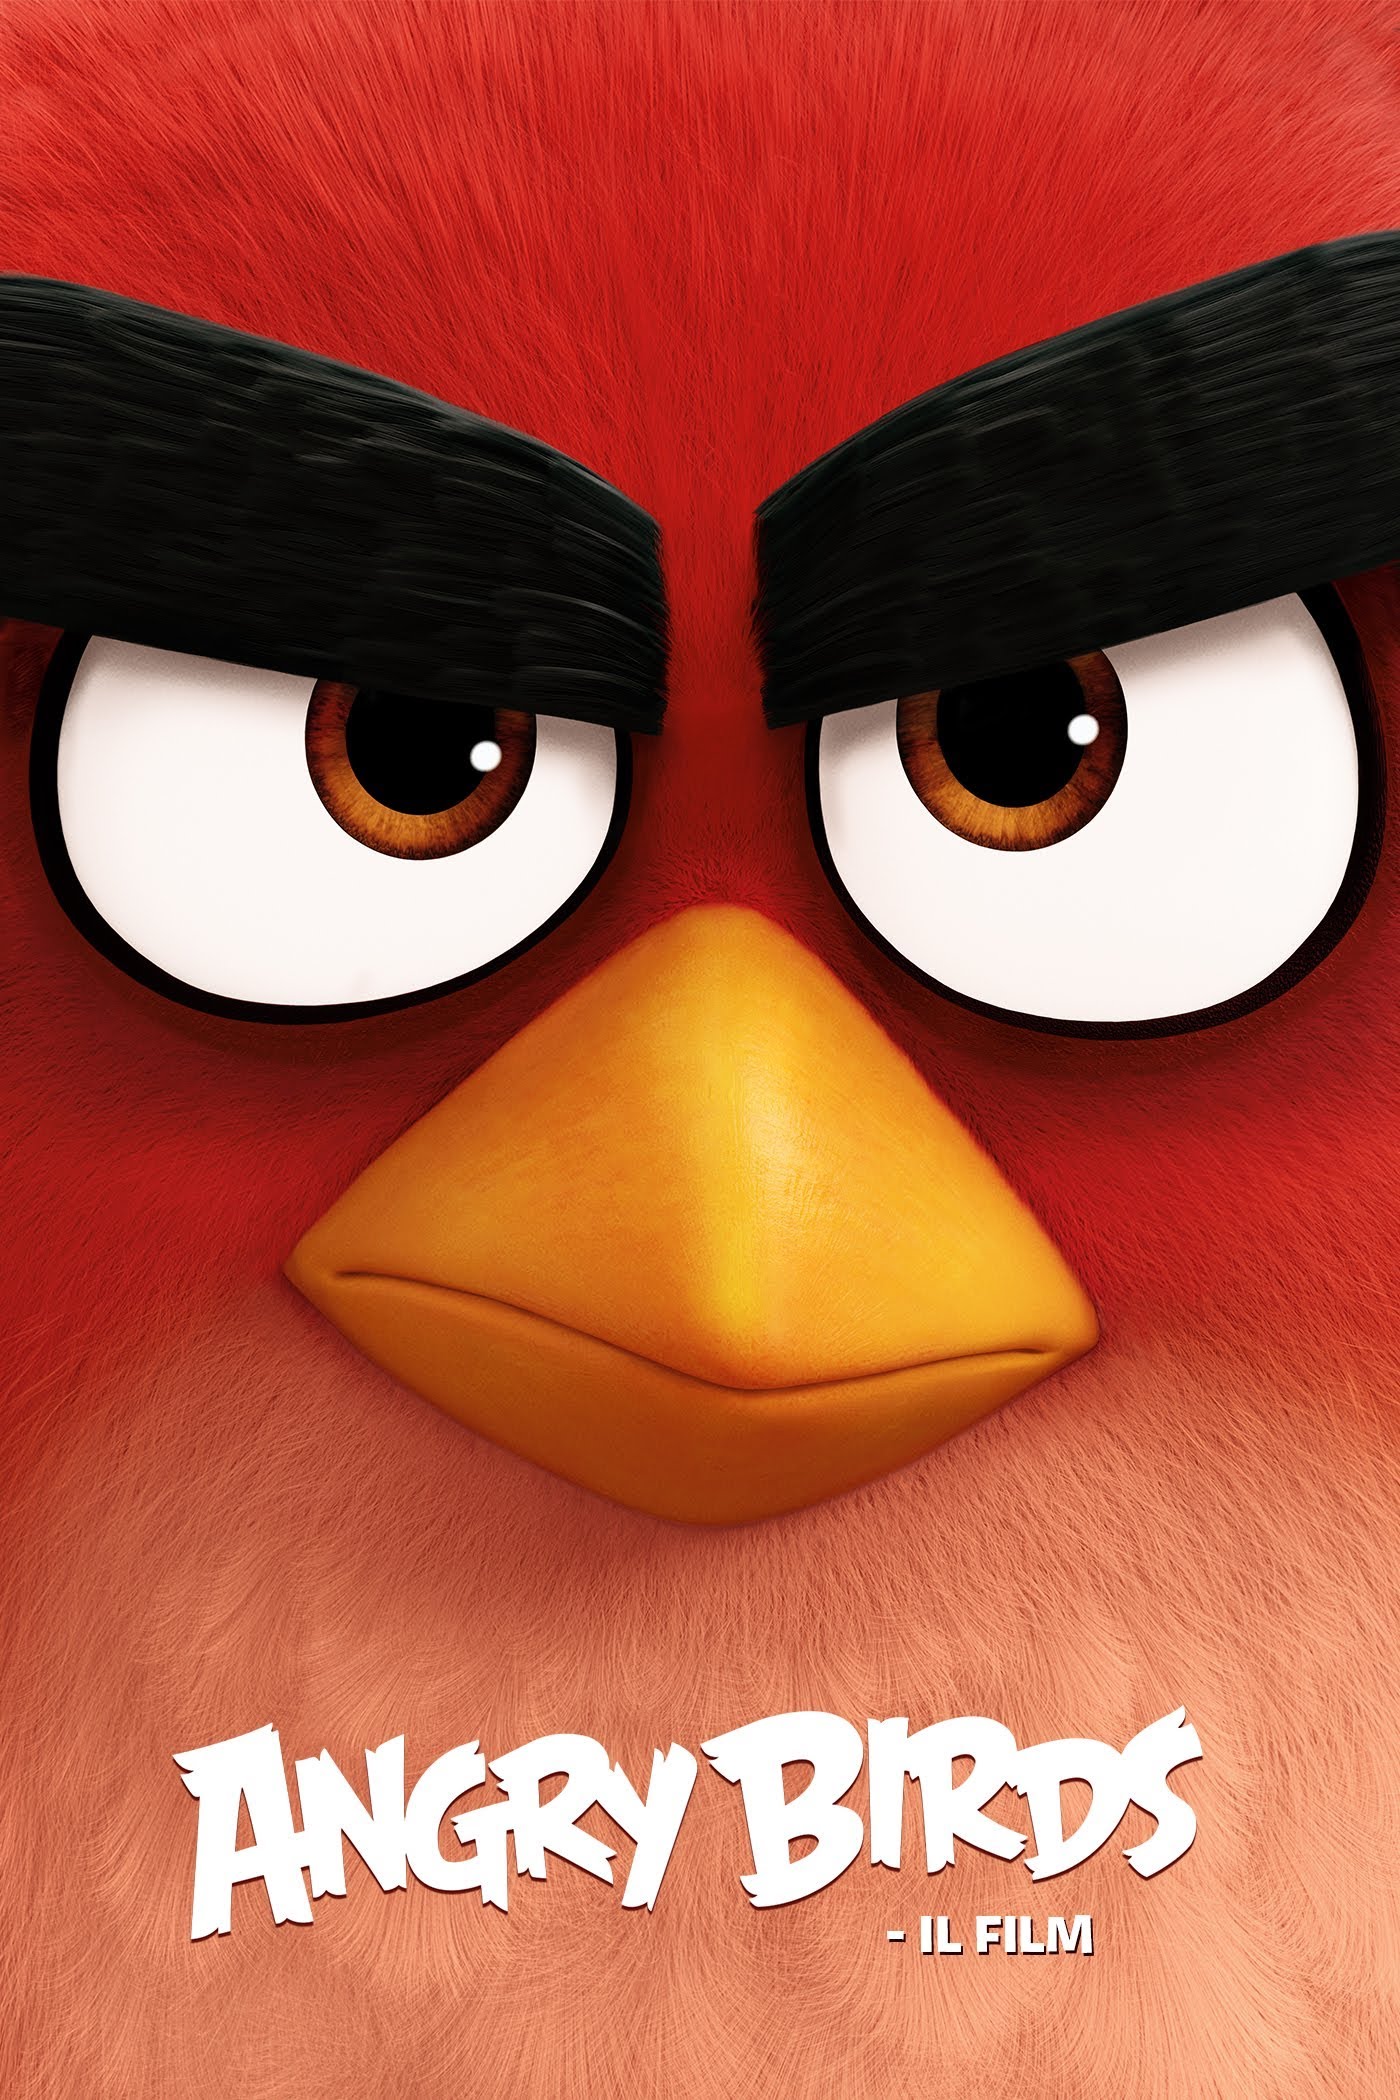 Angry Birds – Il film [HD/3D] (2016)